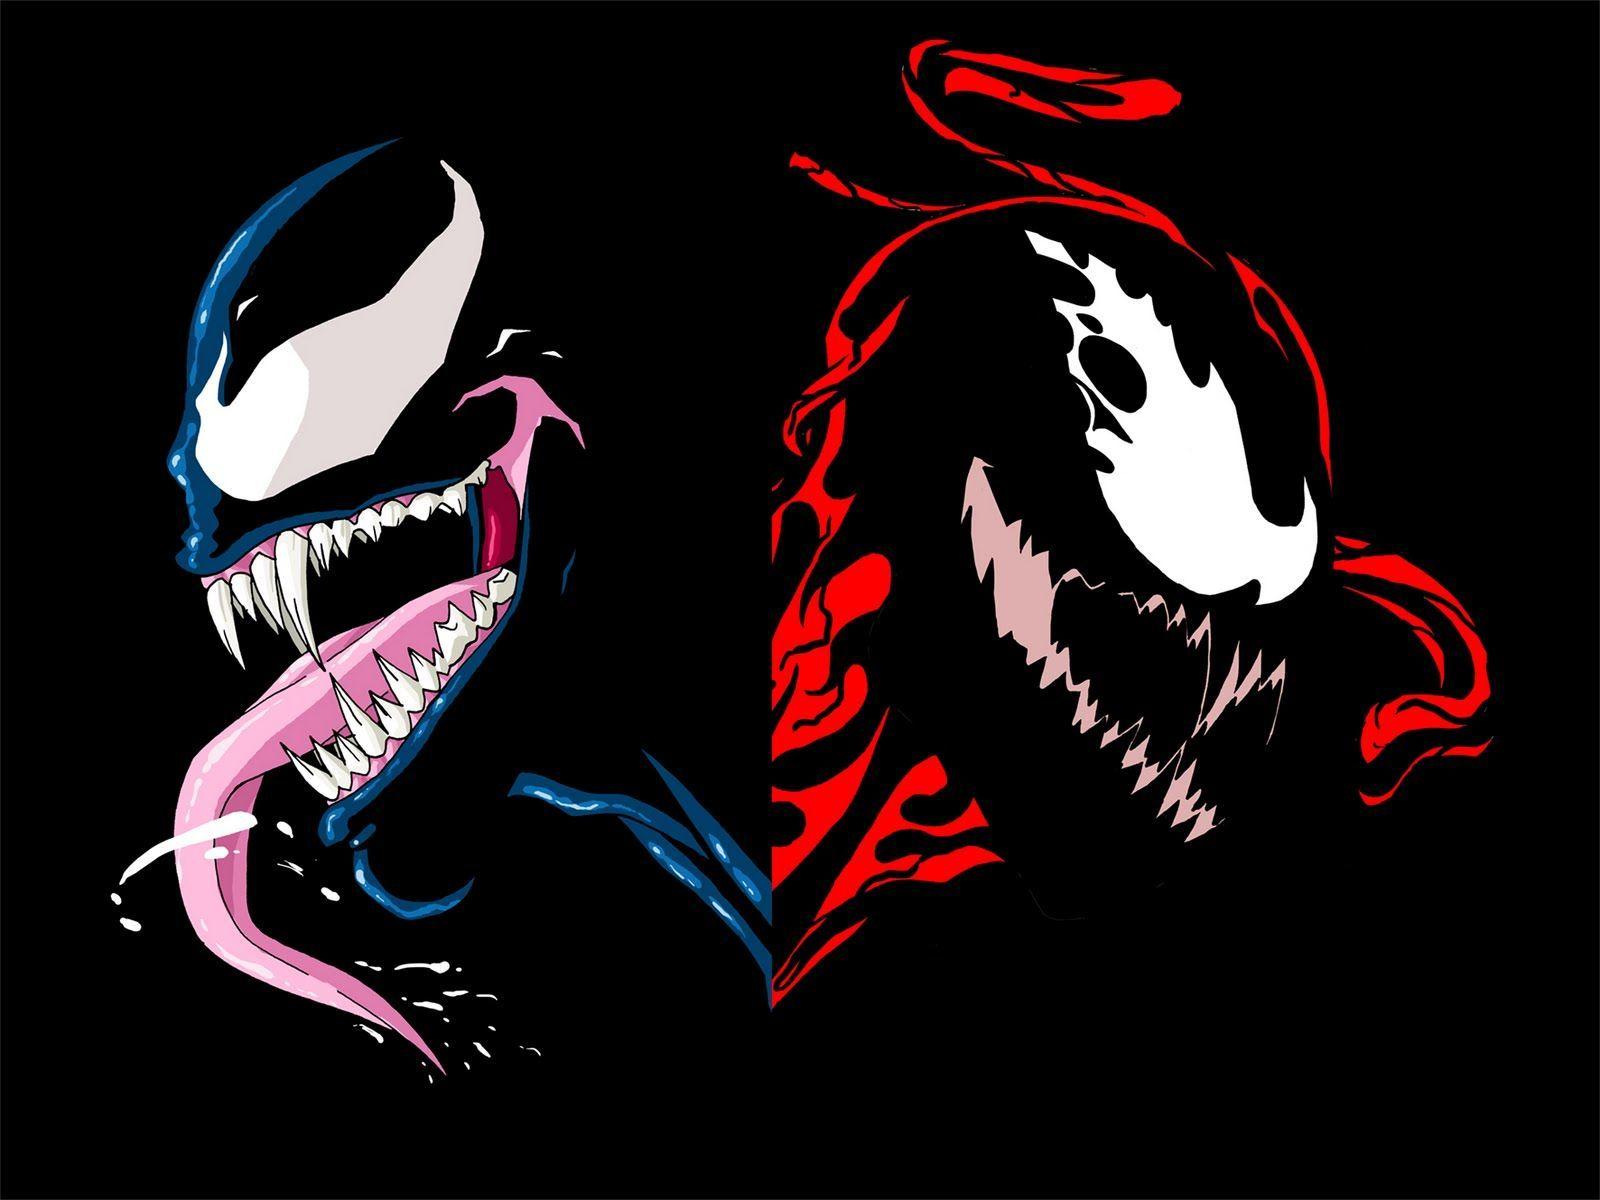 Carnage Wallpaper HD, Desktop Background, Image and Picture